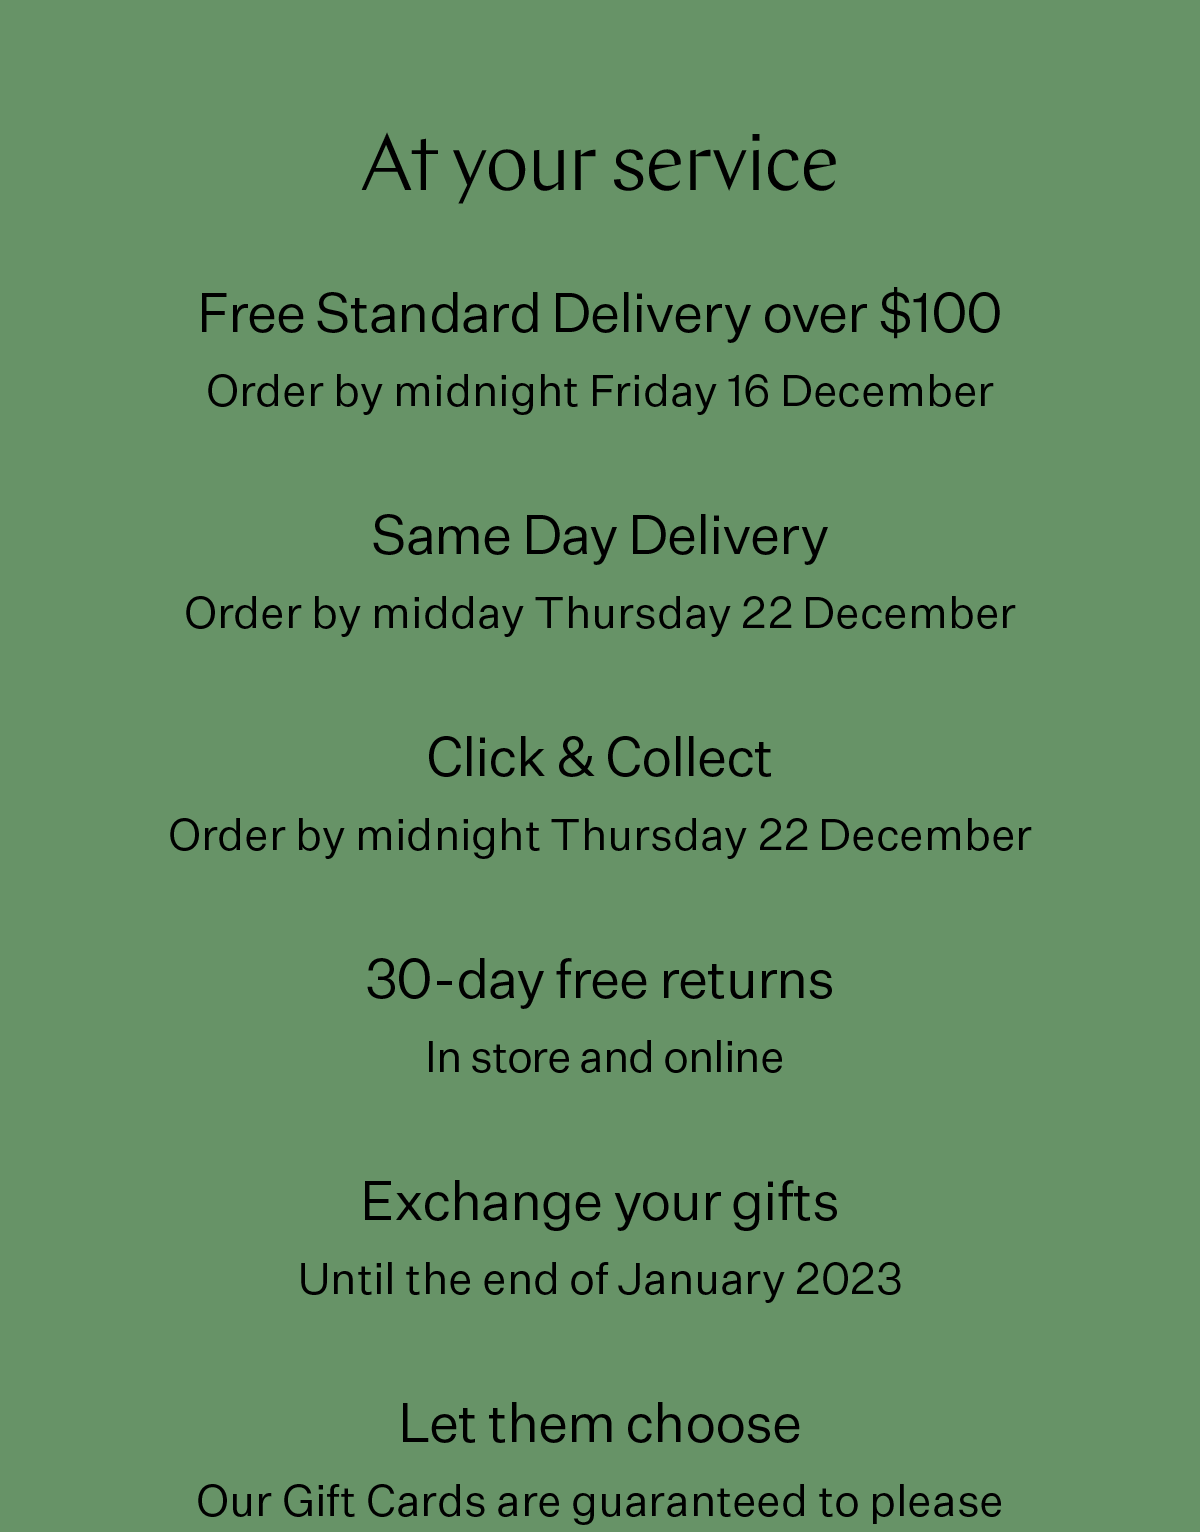 At your service Free Standard Delivery over $100 Order by midnight Friday 16 December Click & Collect Order by midnight Thursday 22 December 30-day returns in store and online Let them choose Our Gift Cards are guaranteed to please